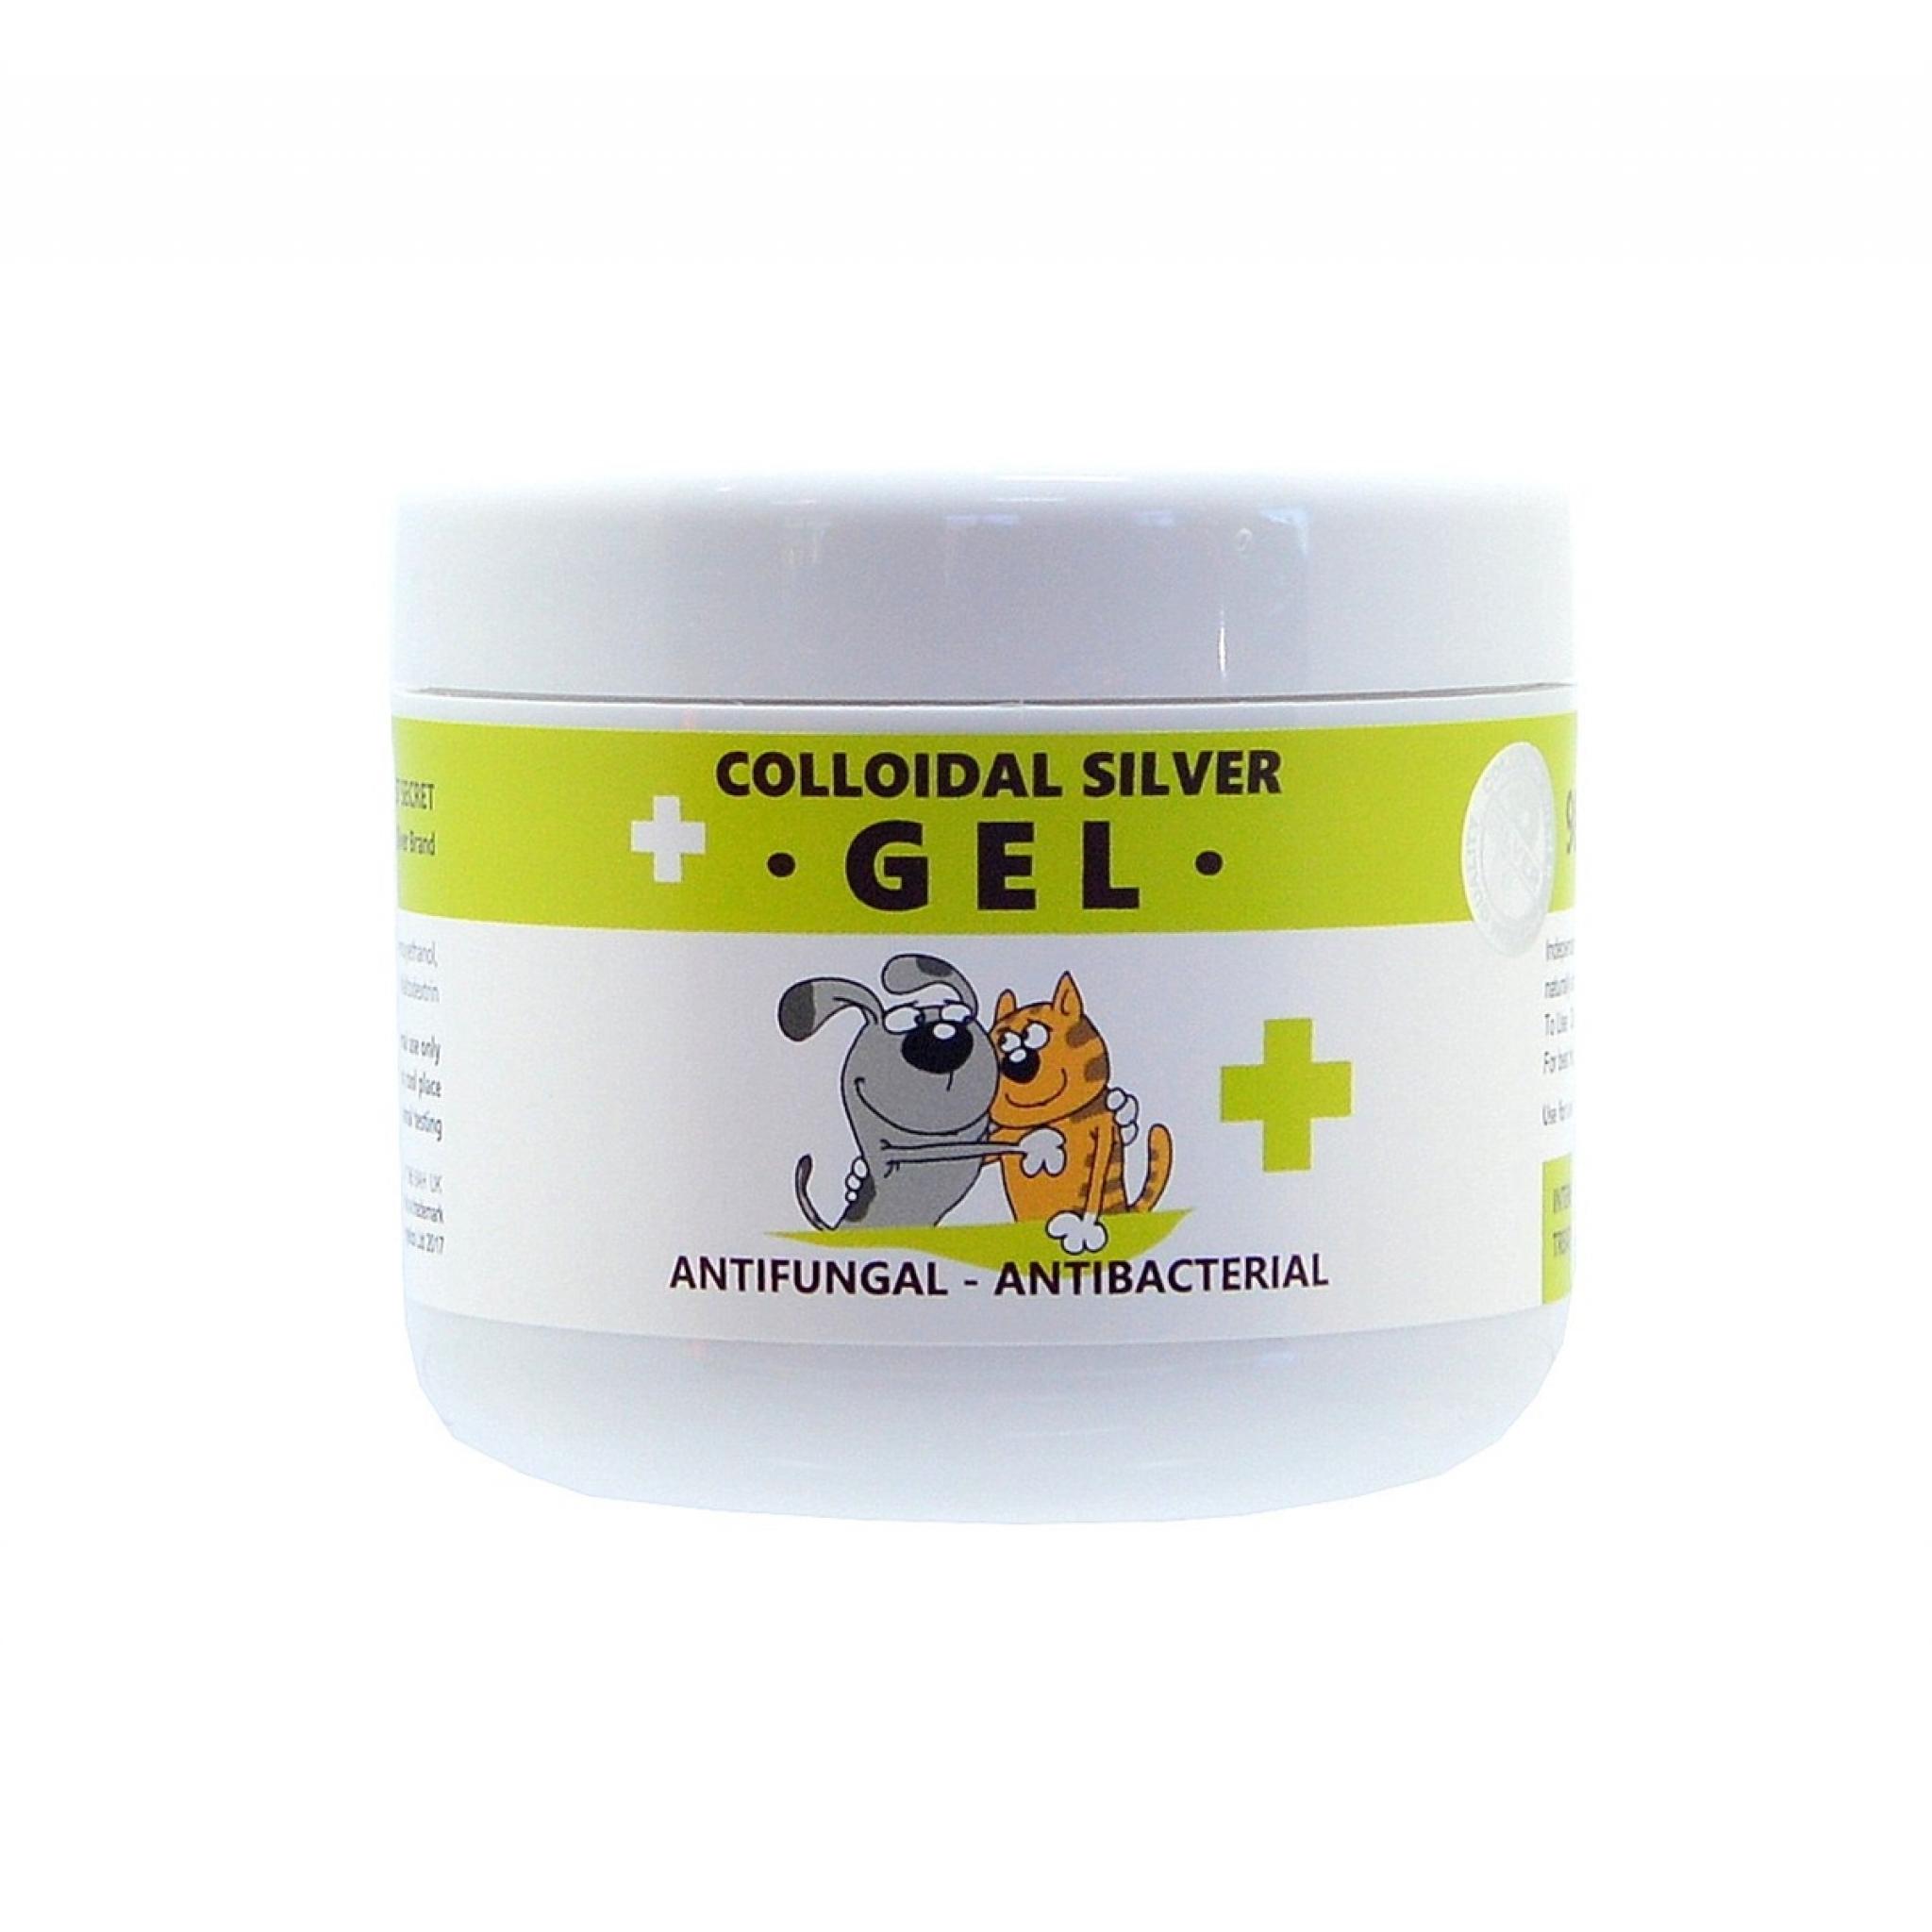 Colloidal Silver Gel for pets